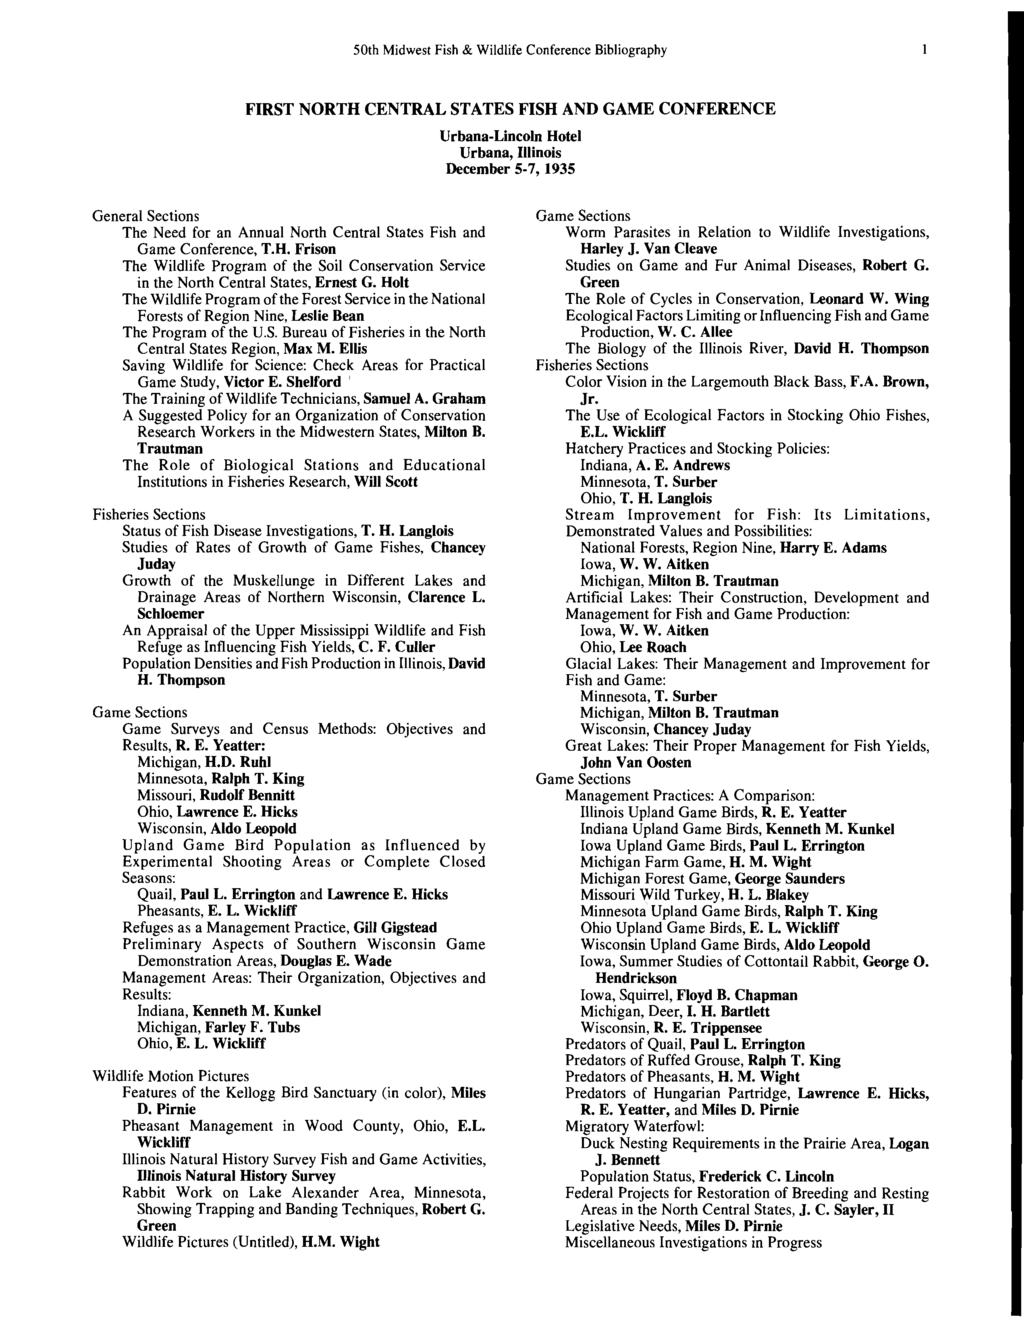 50th Midwest Fish & Wildlife Conference Bibliography FIRST NORTH CENTRAL STATES FISH AND GAME CONFERENCE Urbana-Lincoln Hotel Urbana, Illinois December 5-7,1935 General Sections The Need for an